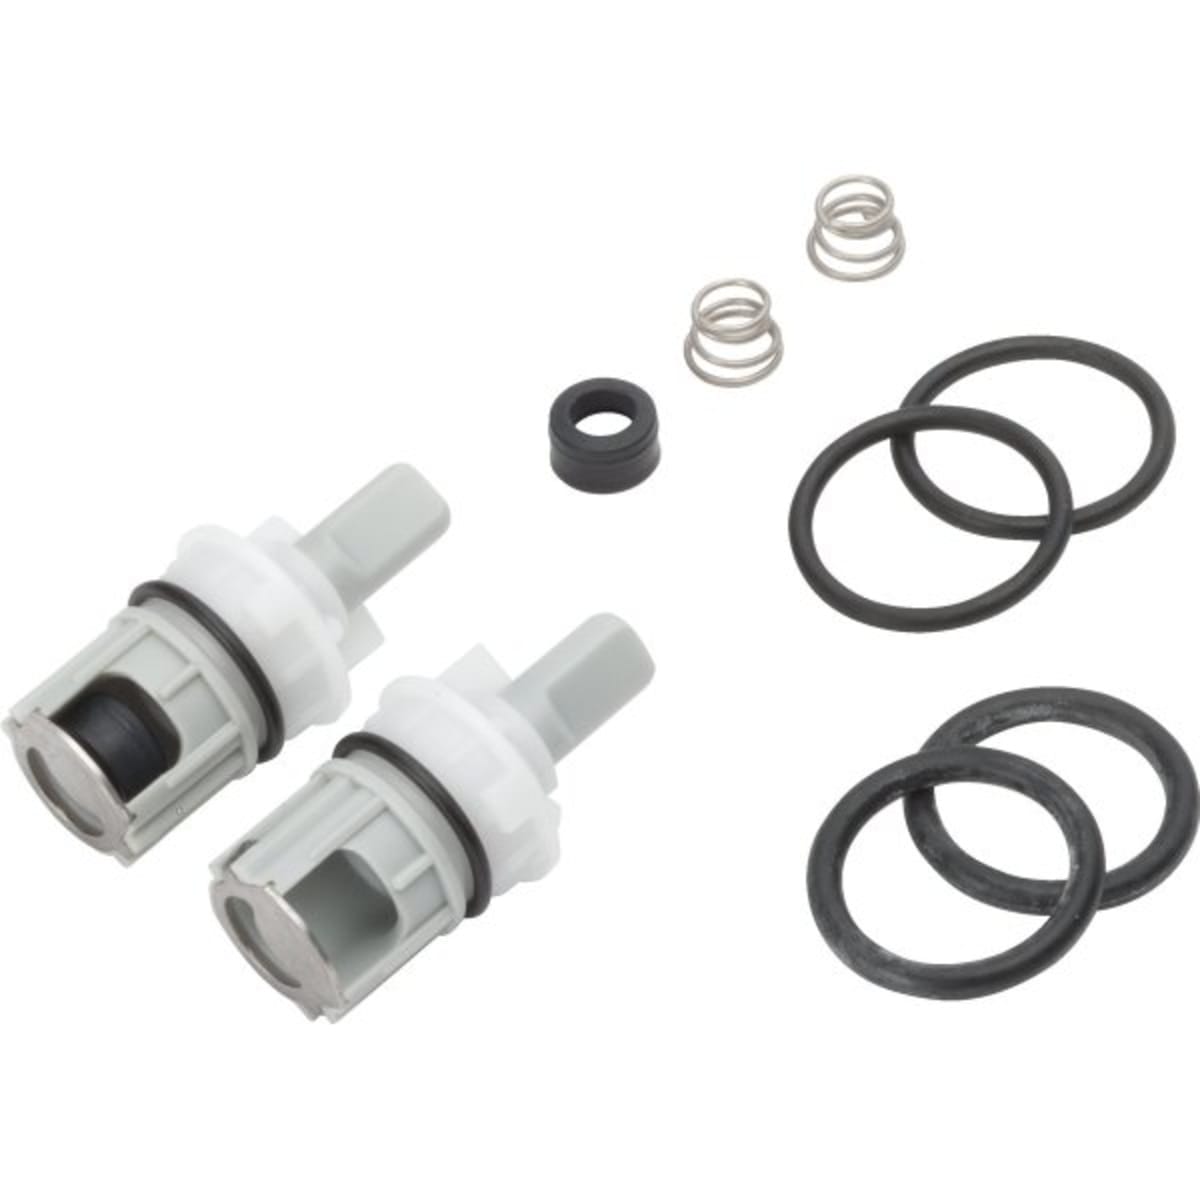 Replacement For Delta Two Handle Faucet Repair Kit Hd Supply